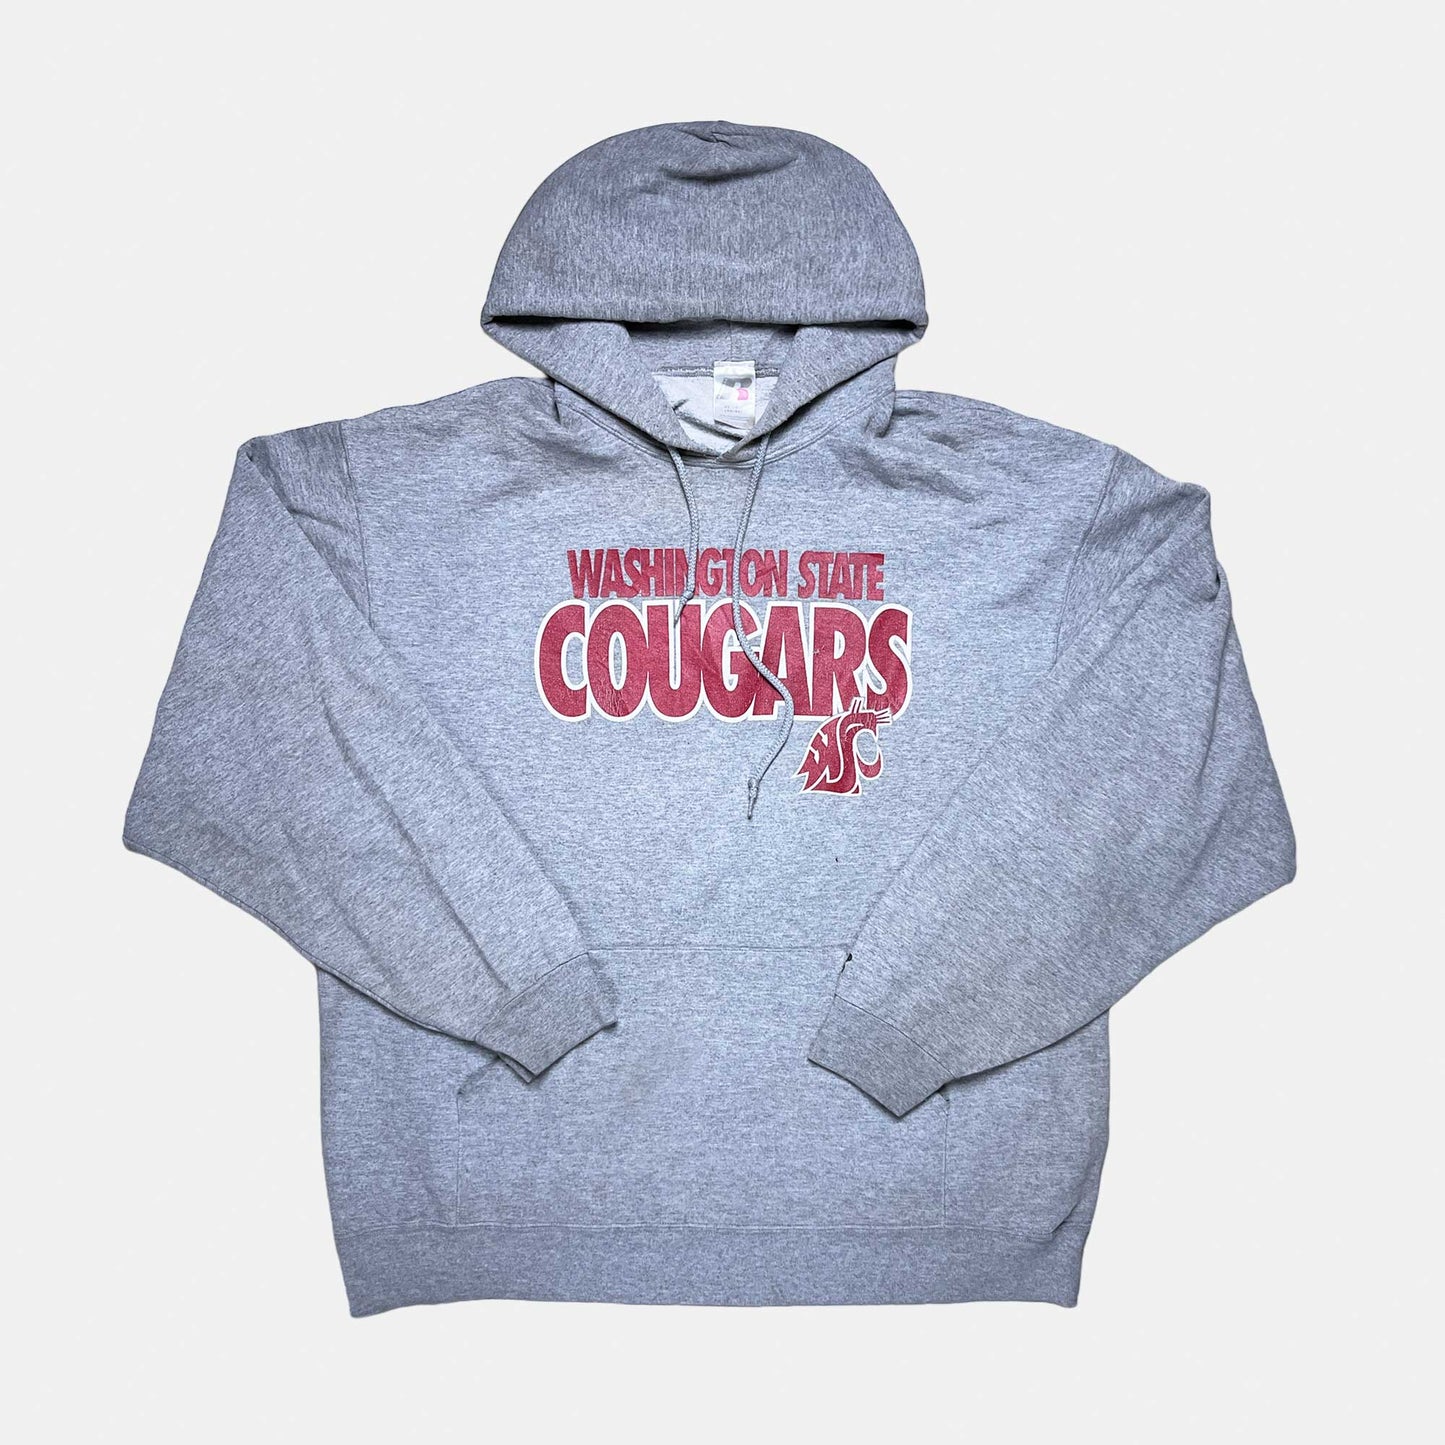 Washington State Cougars - Spellout - Größe XL - Russell NCAA Hoodie